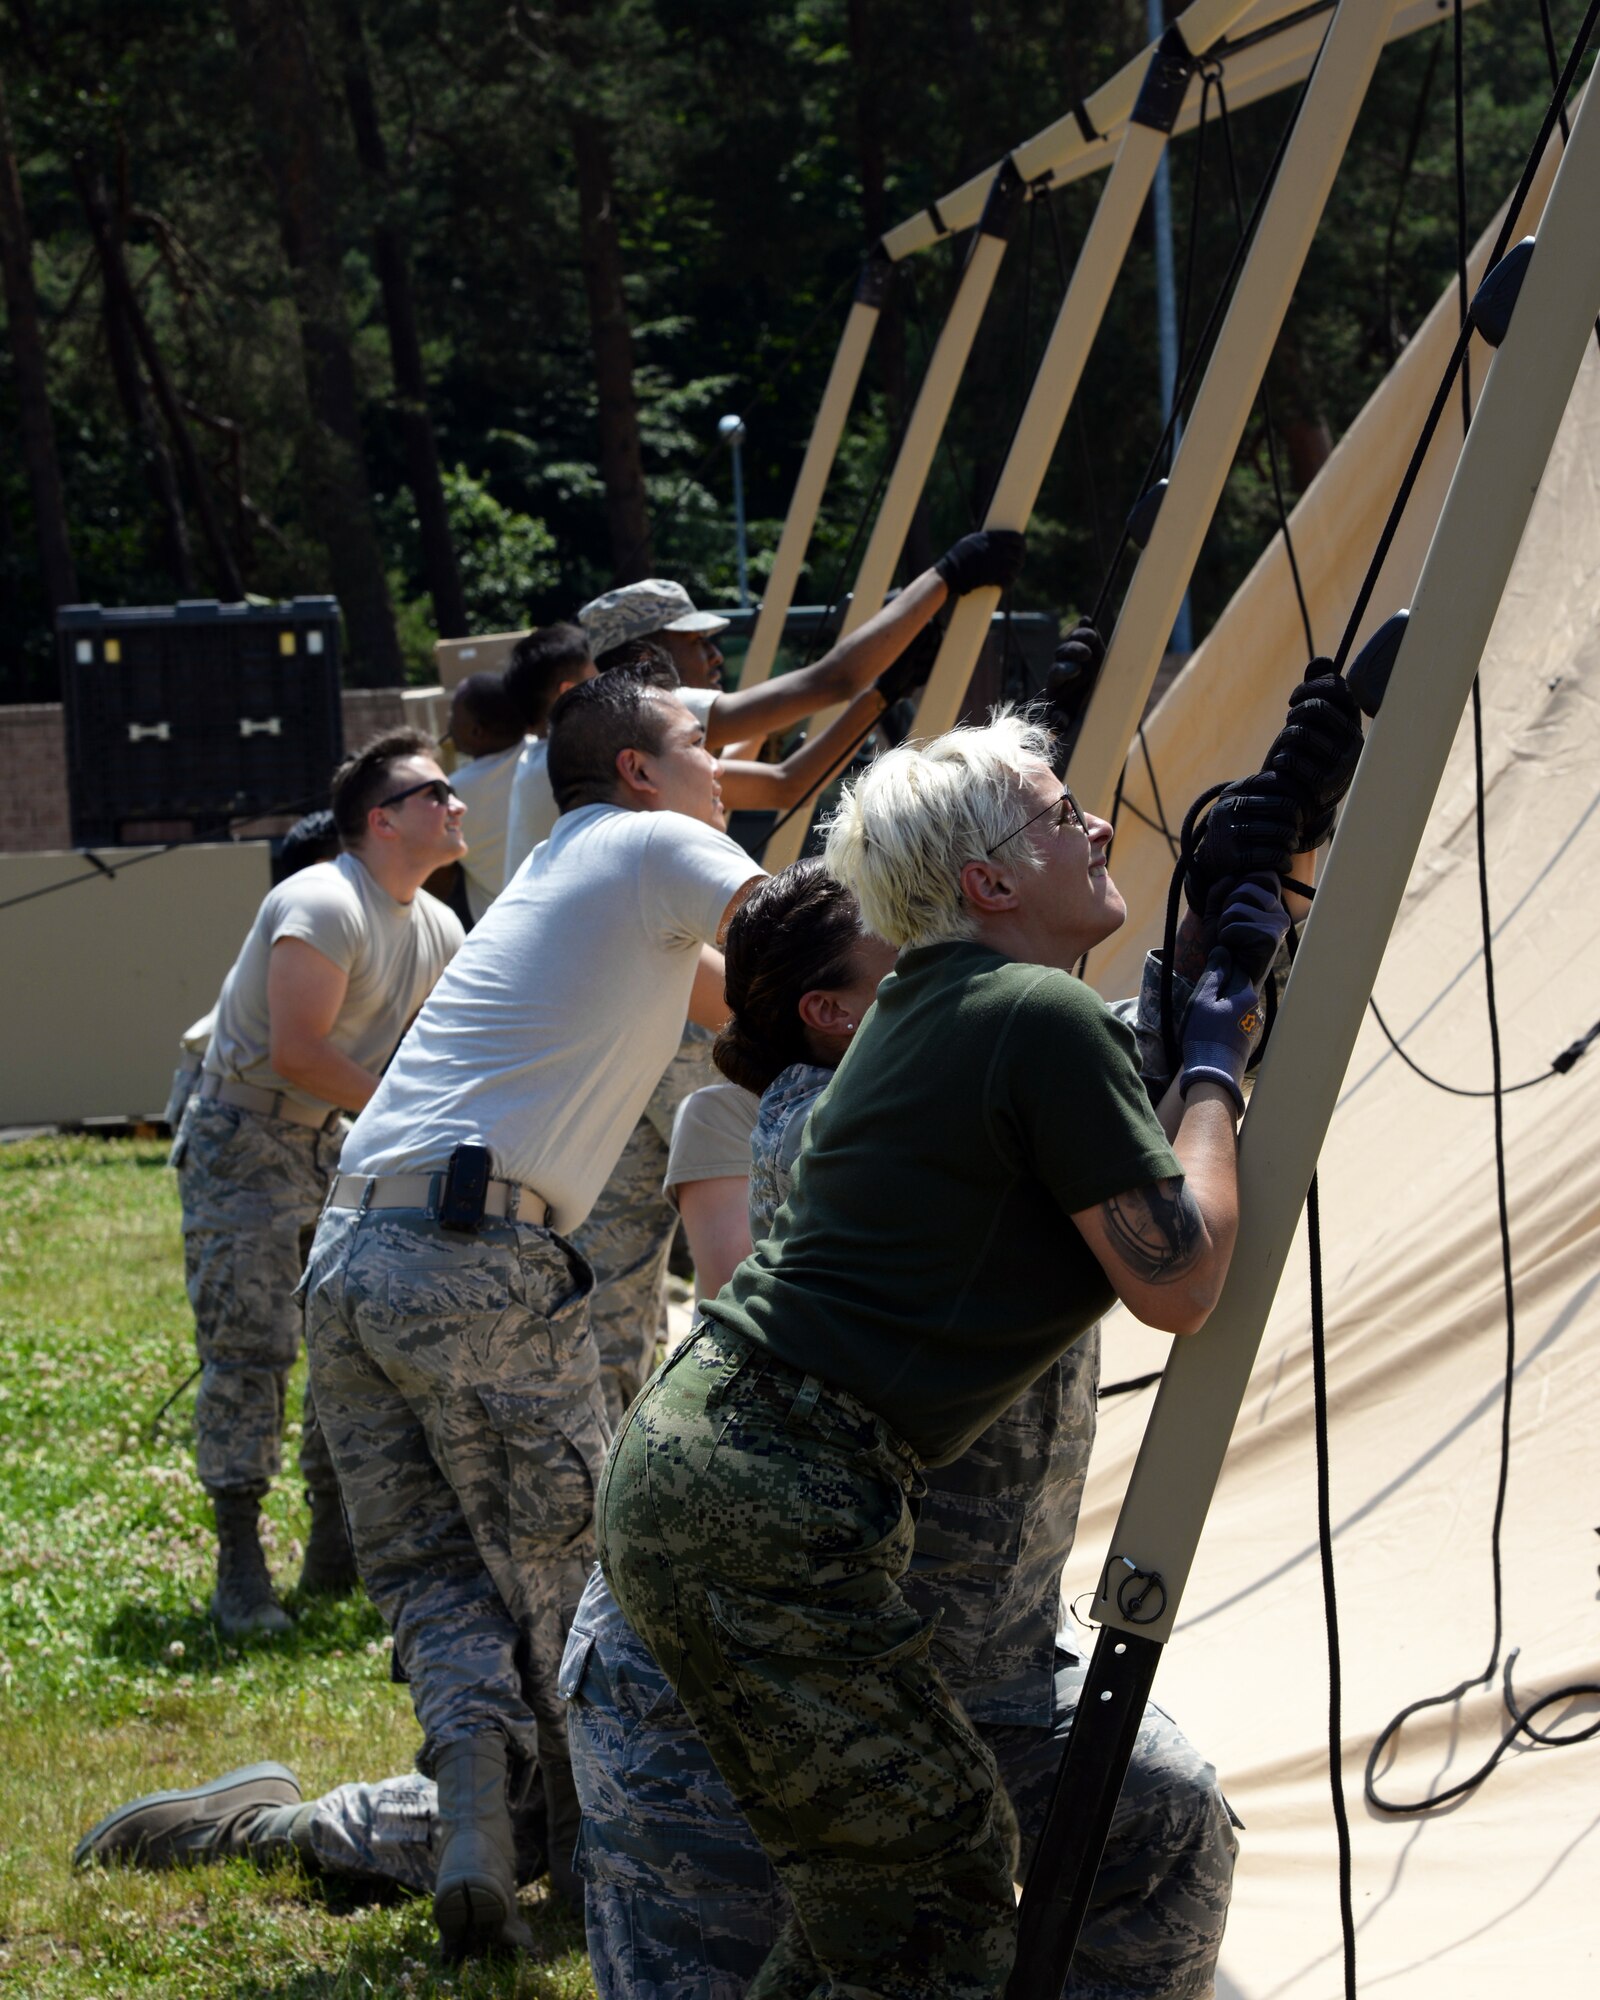 Airmen from the 86th Medical Group and 86th Logistics Squadron, joined by members of the Croatian armed forces, set up an Expeditionary Medical Support System modular field hospital during en route patient staging training during Exercise Maroon Surge on Ramstein Air Base, Germany, June 4, 2018. Designed for rapid mobility and efficient setup, EMEDS can deploy within 24 hours of notification, and establish emergency room capability in two hours, operating room capability in four hours, and critical care capability in six hours. (U.S. Air Force photo by Airman 1st Class Ariel Leighty)